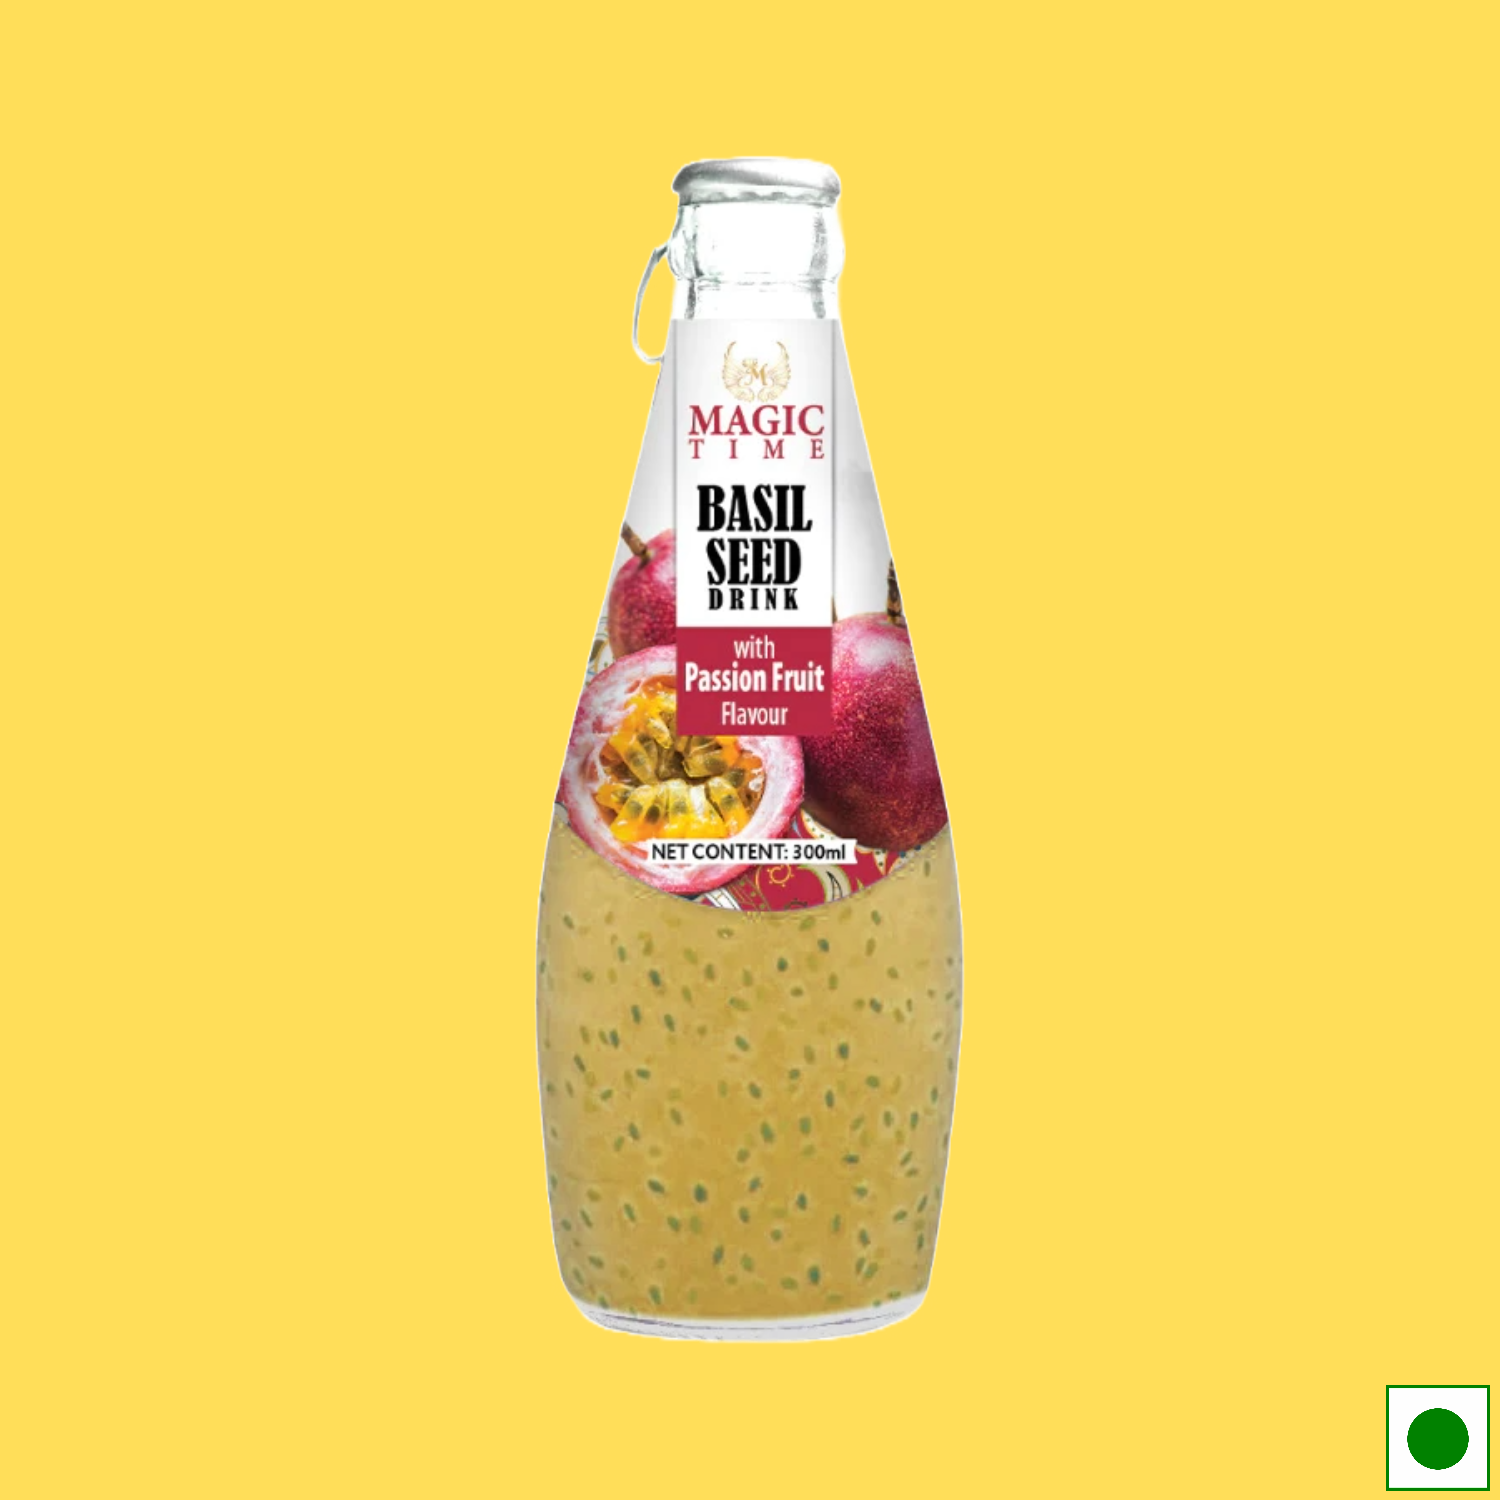 Magic Time Passion Fruit Flavored Basil Seed Drink, 300ml (Imported)